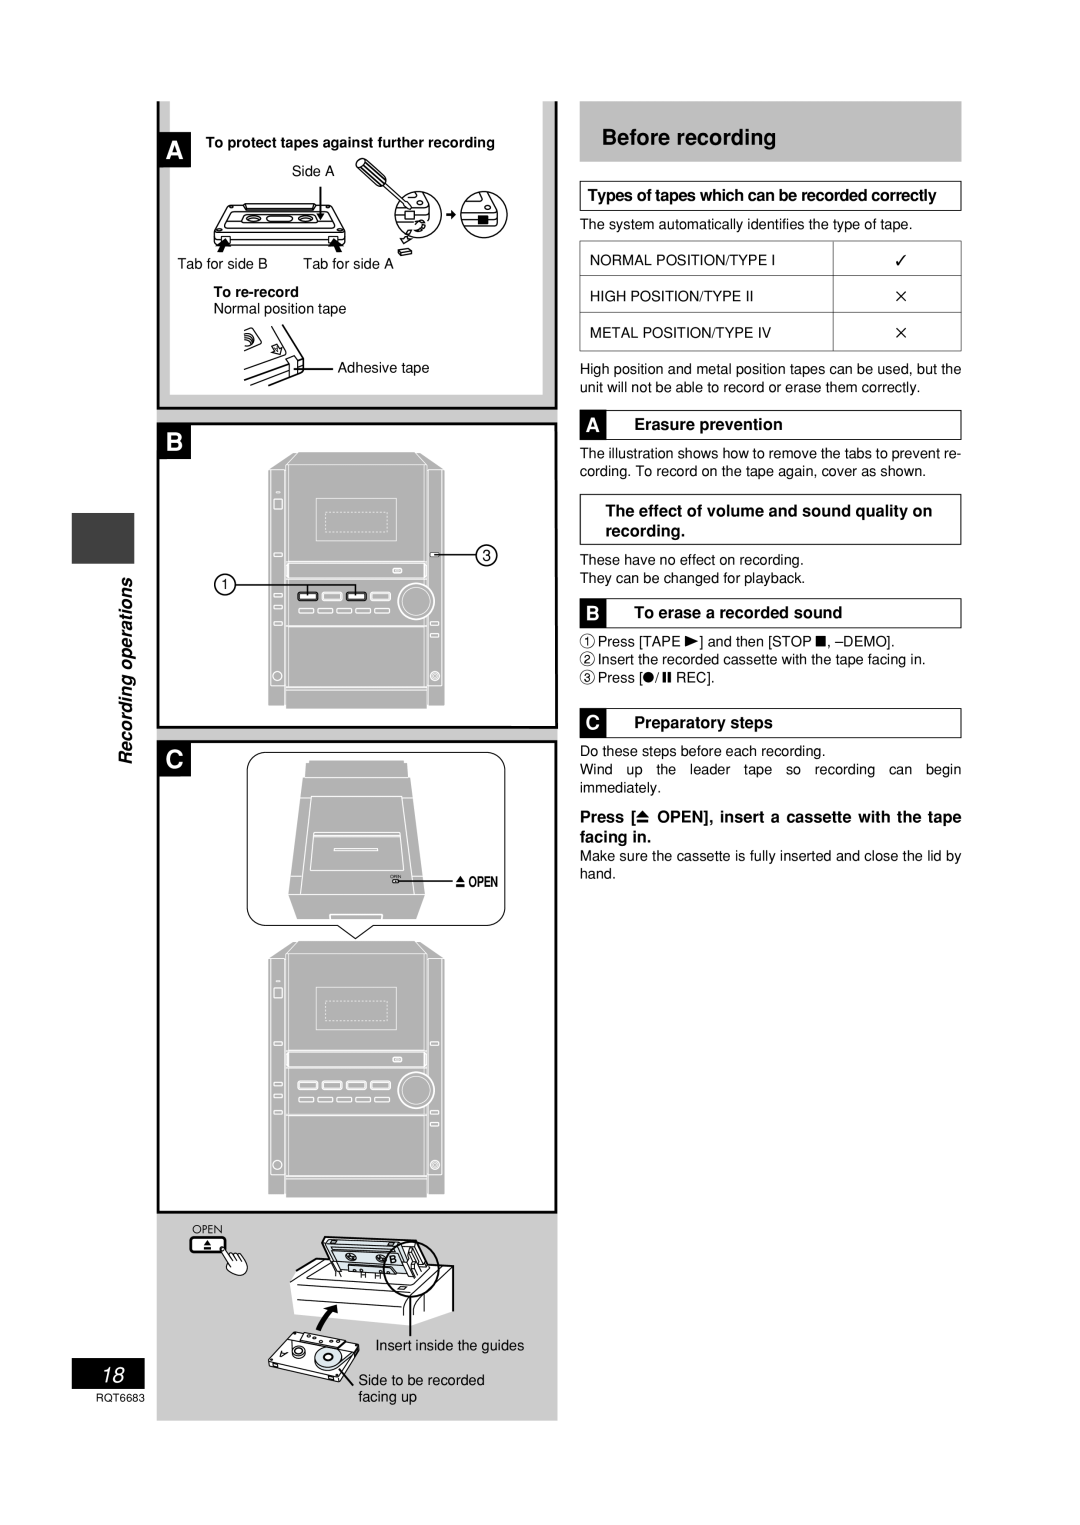 Panasonic SC-PM18 manual Before recording, Types of tapes which can be recorded correctly, AErasure prevention 